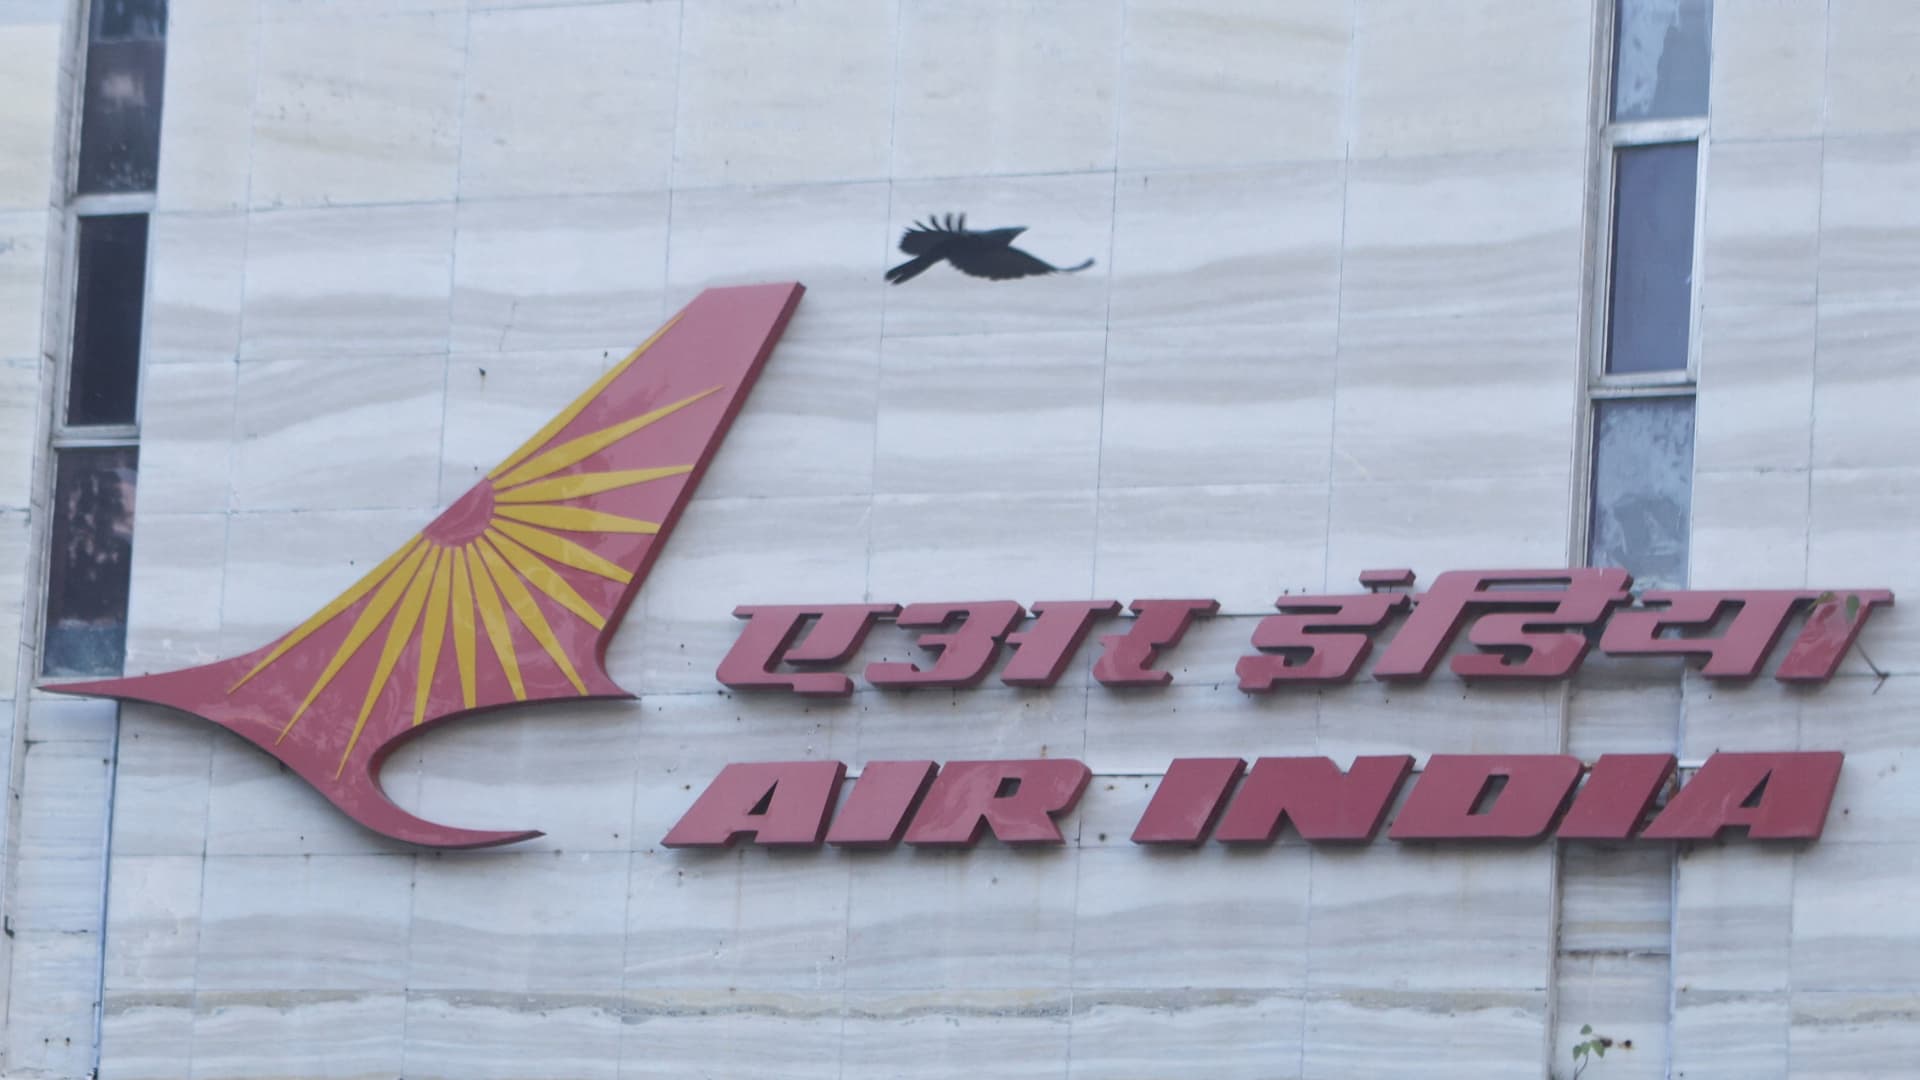 Air India plane from Delhi to San Francisco lands in Russia after engine problem